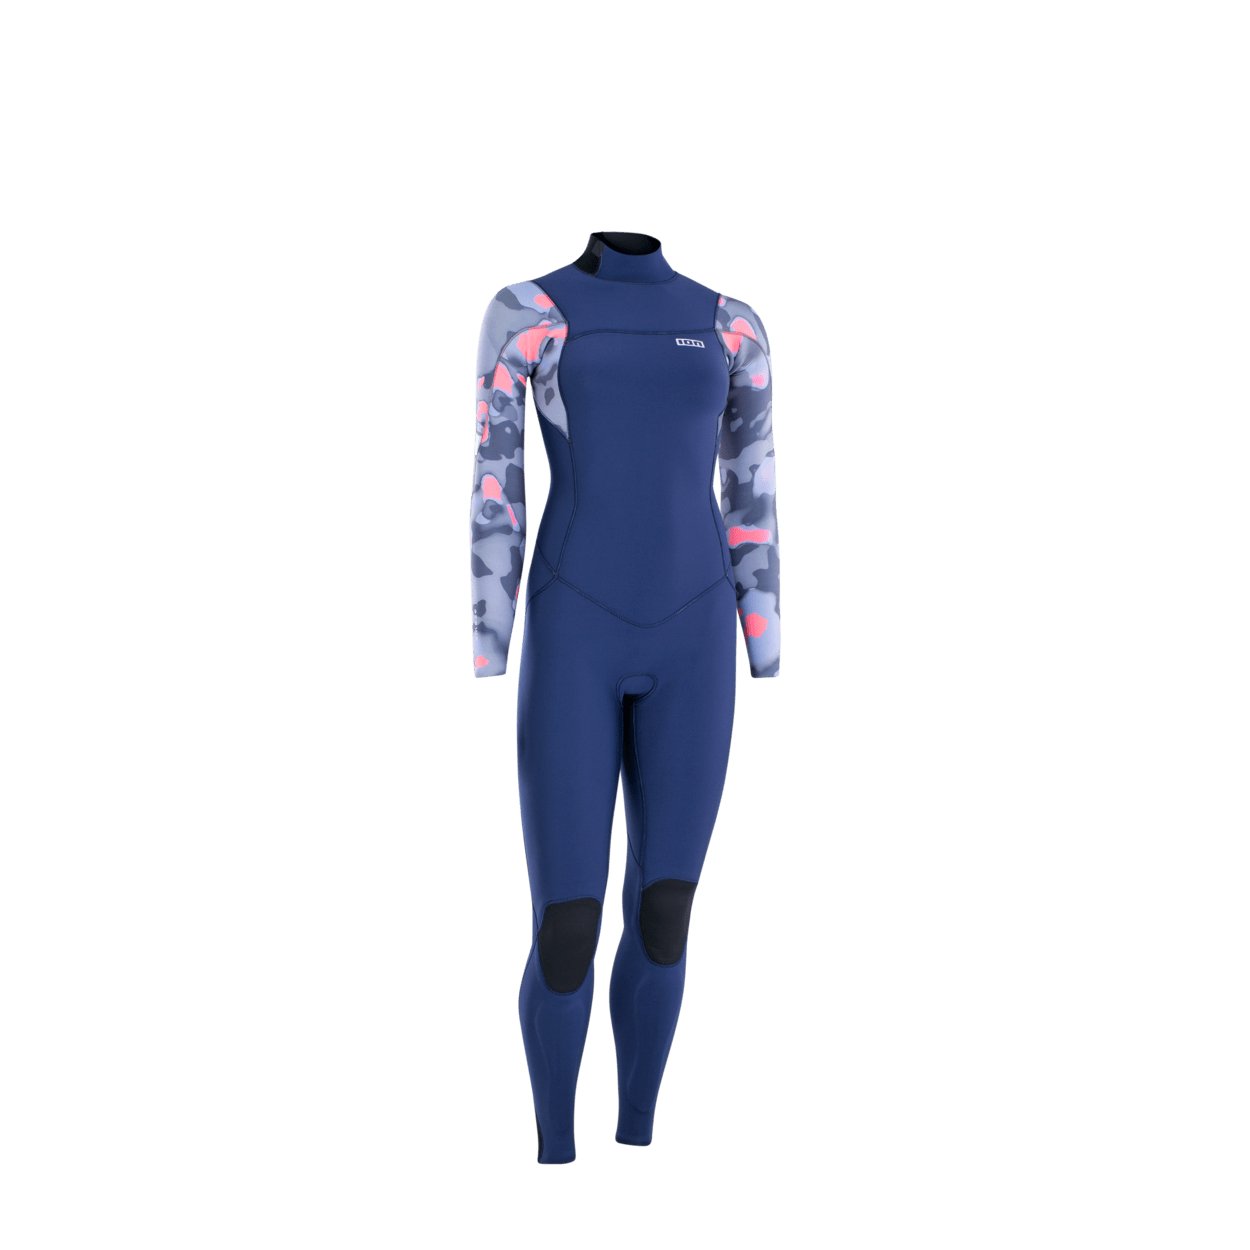 ION Women Wetsuit Amaze Amp 4/3 Back Zip 2023 - Worthing Watersports - 9010583057514 - Wetsuits - ION Water